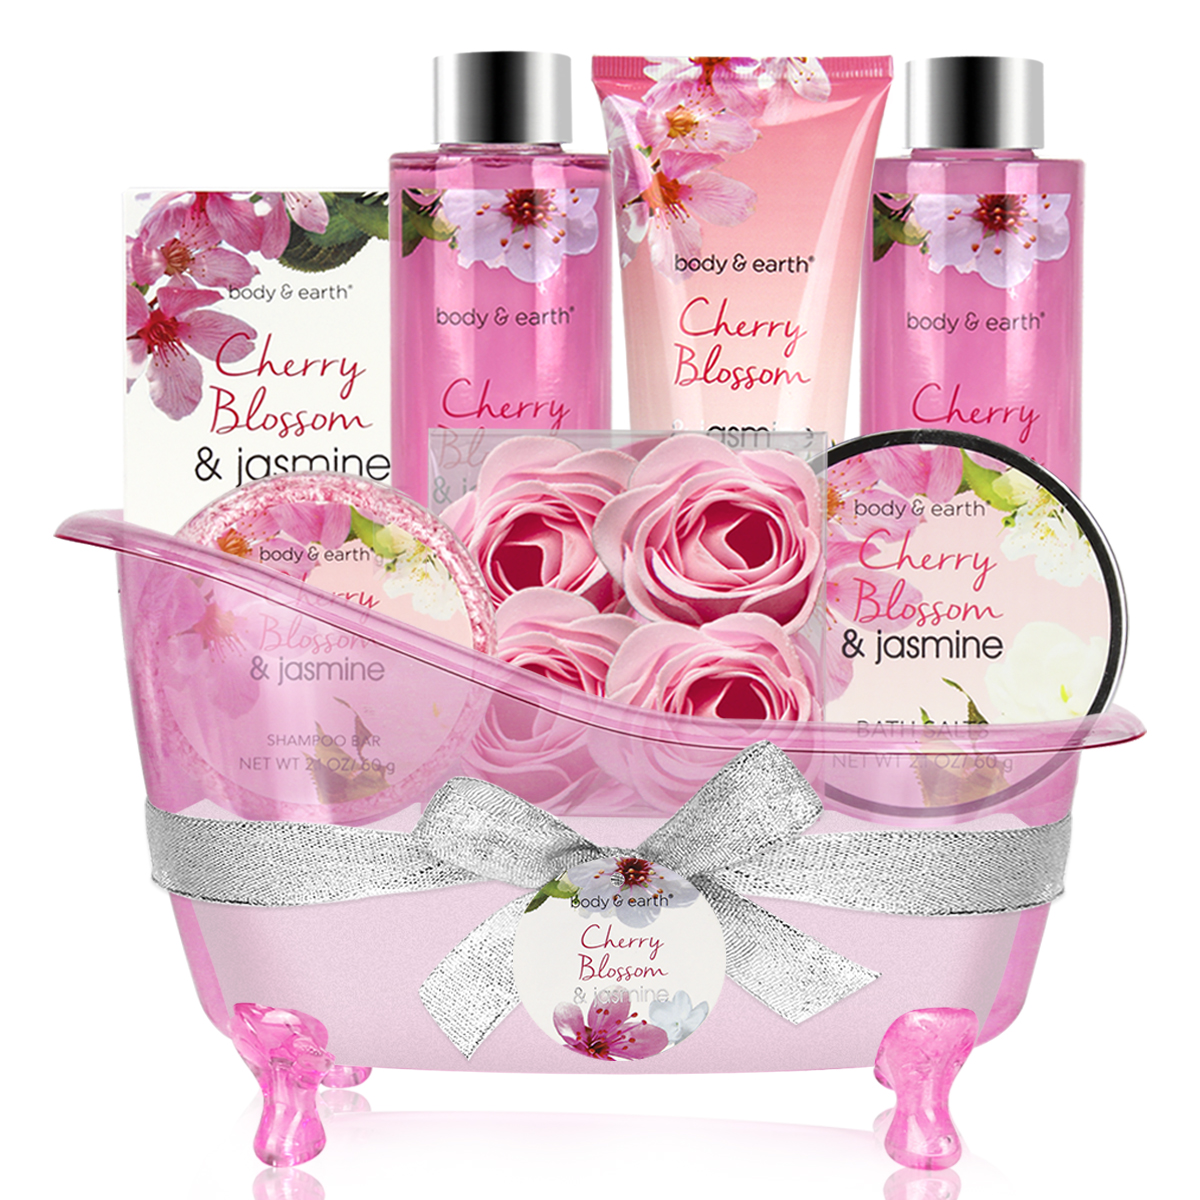 Bath Gift Sets for Women, 8 Pcs Cherry Blossom & Jasmine Spa Baskets, Beauty Body Holiday Birthday Mothers Day Gifts for Mom - image 1 of 13